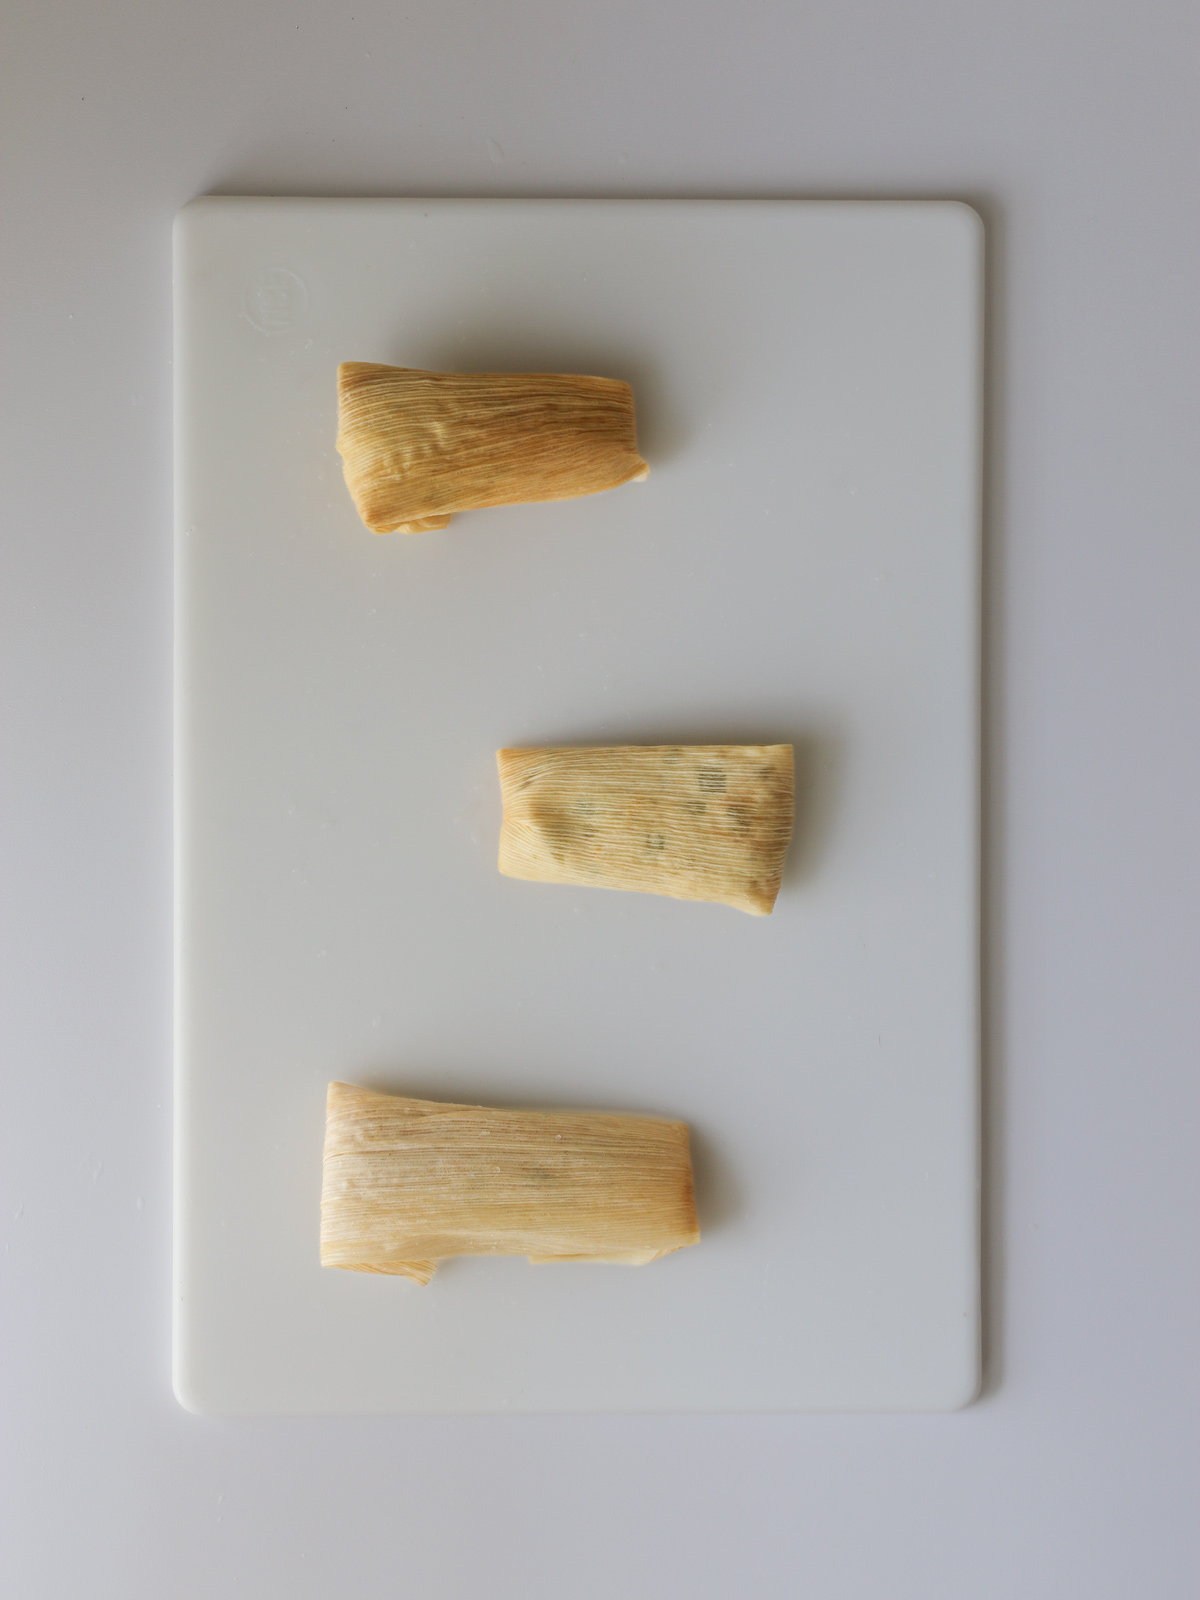 three rolled tamales on the work surface.